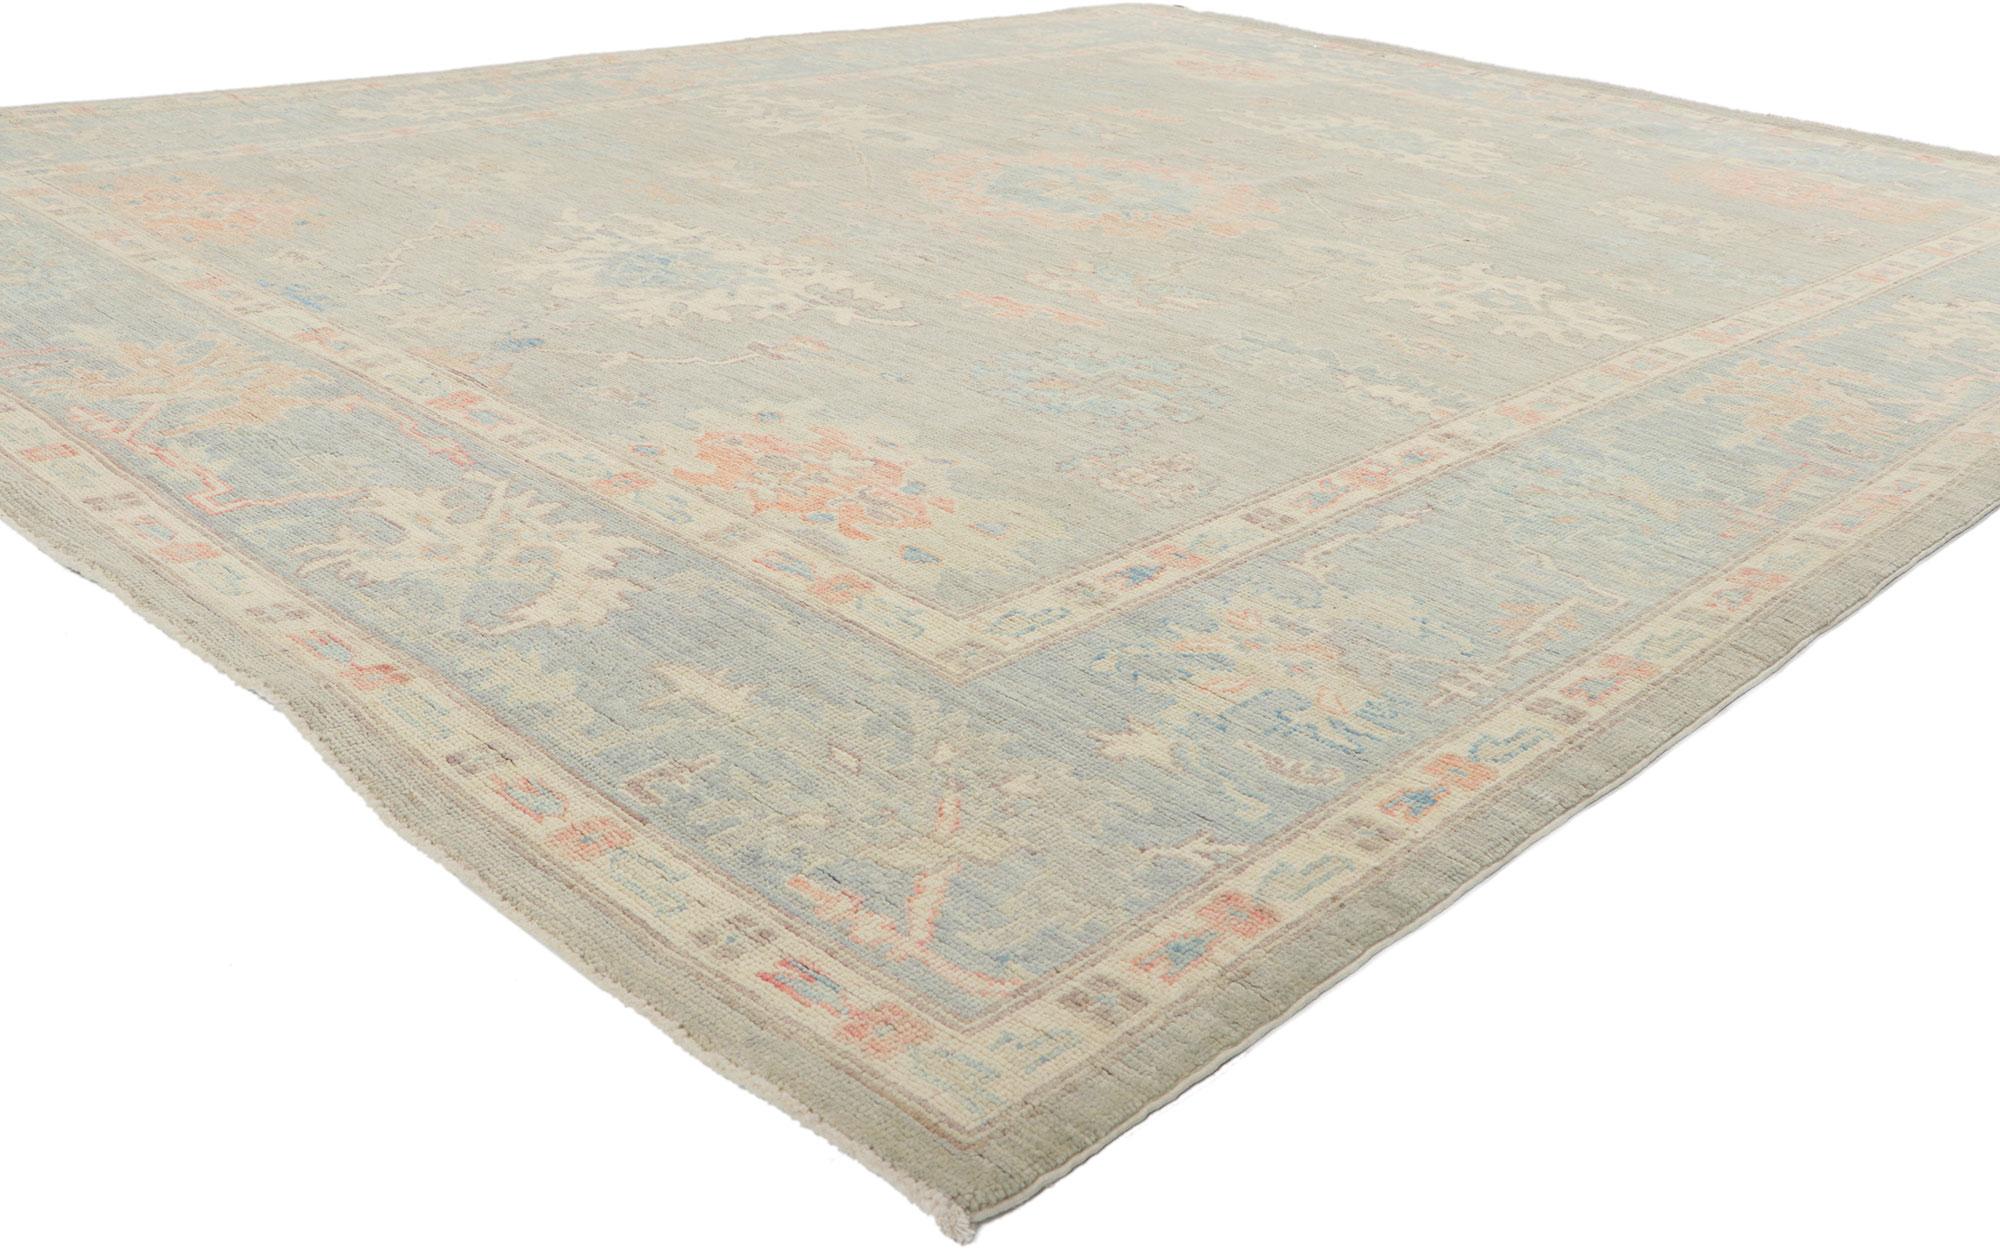 80894 Colorful Pastel Oushak Rug with Modern Style, 08'00 x 10'00. Skillfully crafted and enveloped in the refined opulence evocative of Bridgerton style and Regencycore, this meticulously hand-knotted wool Oushak rug gracefully unfurls as a